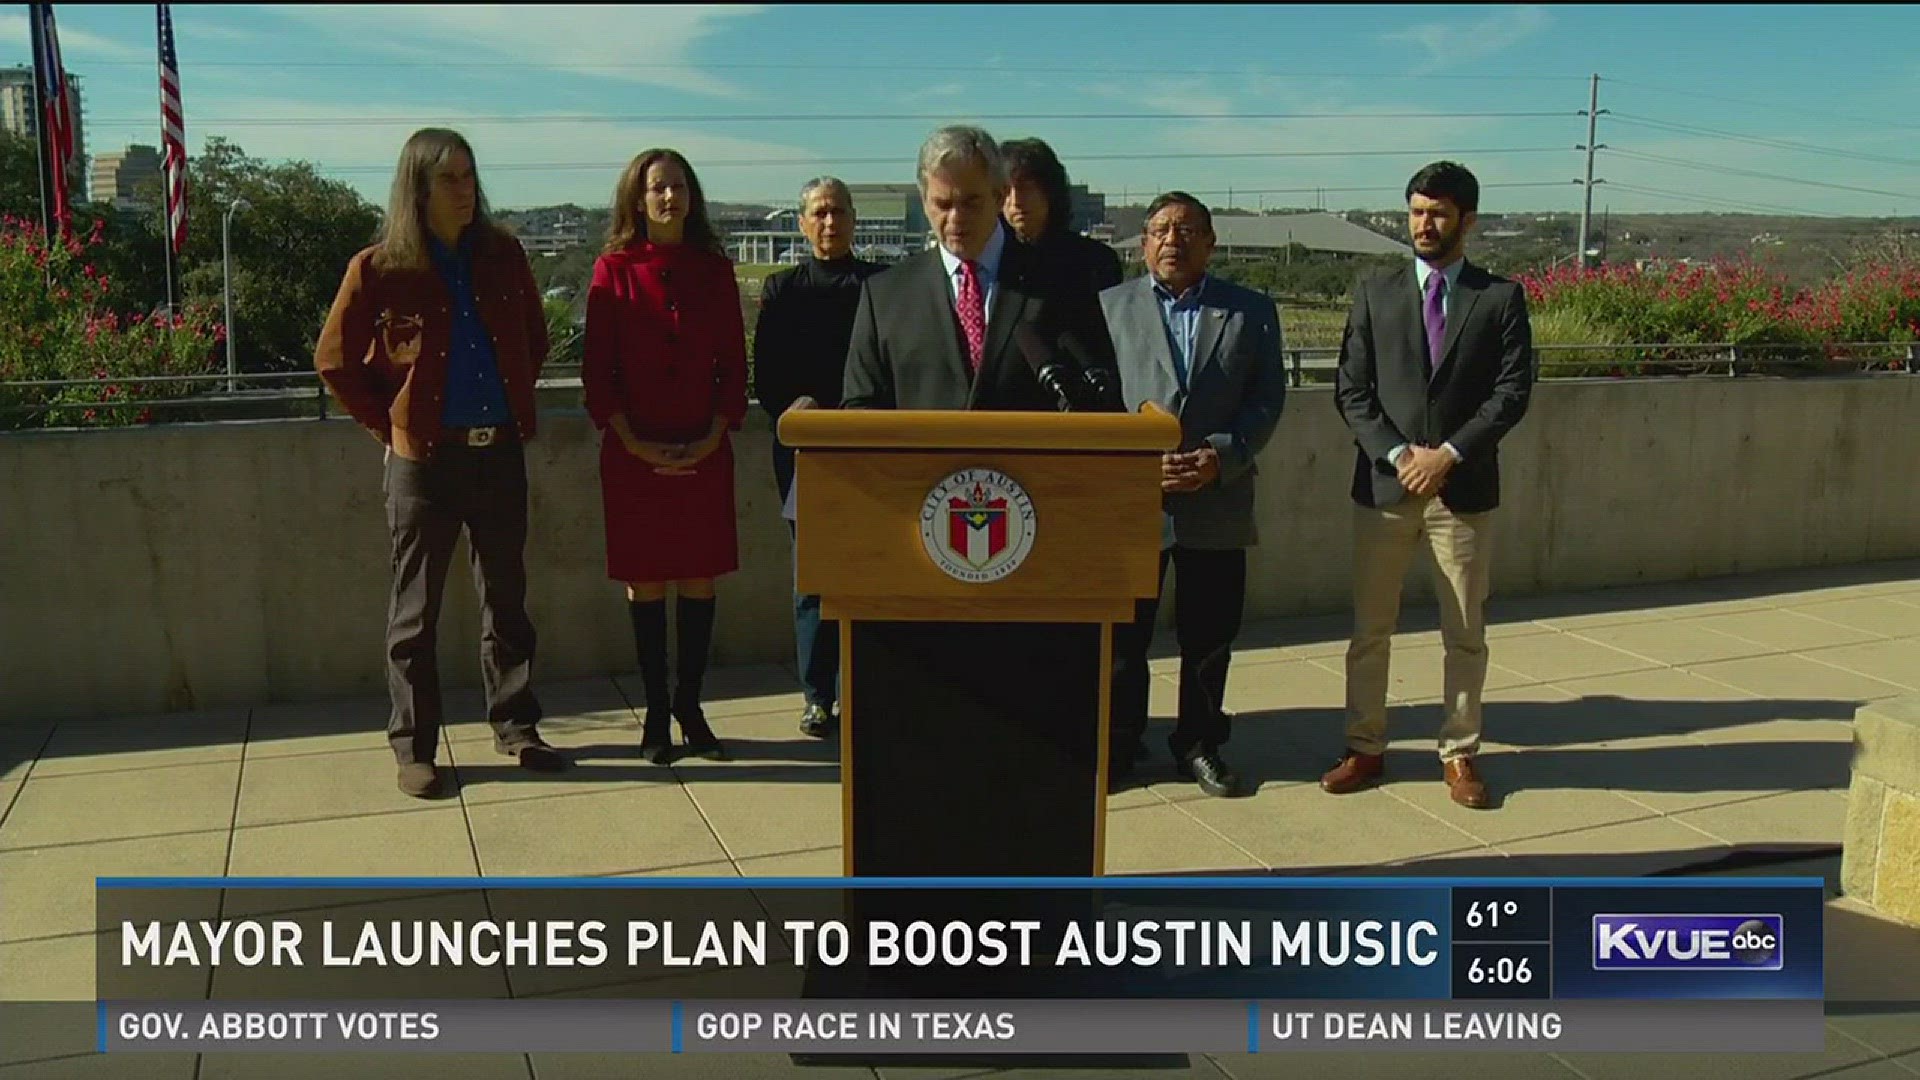 Mayor launches plan to boost Austin music